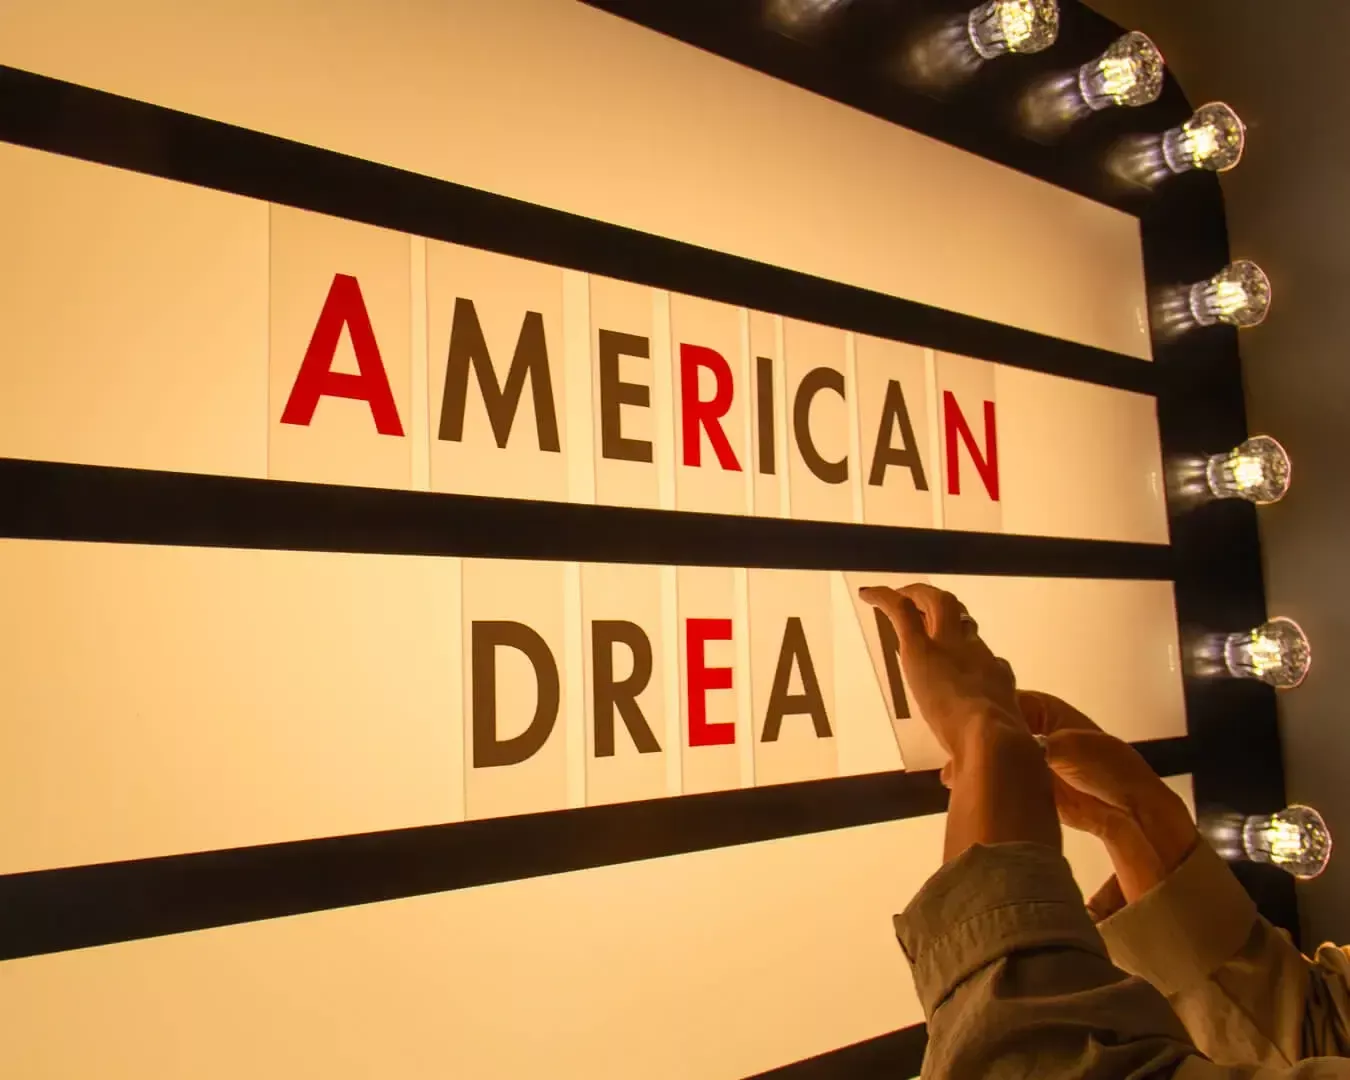 American Dream - Personalized plaque, with retro-style letter changes